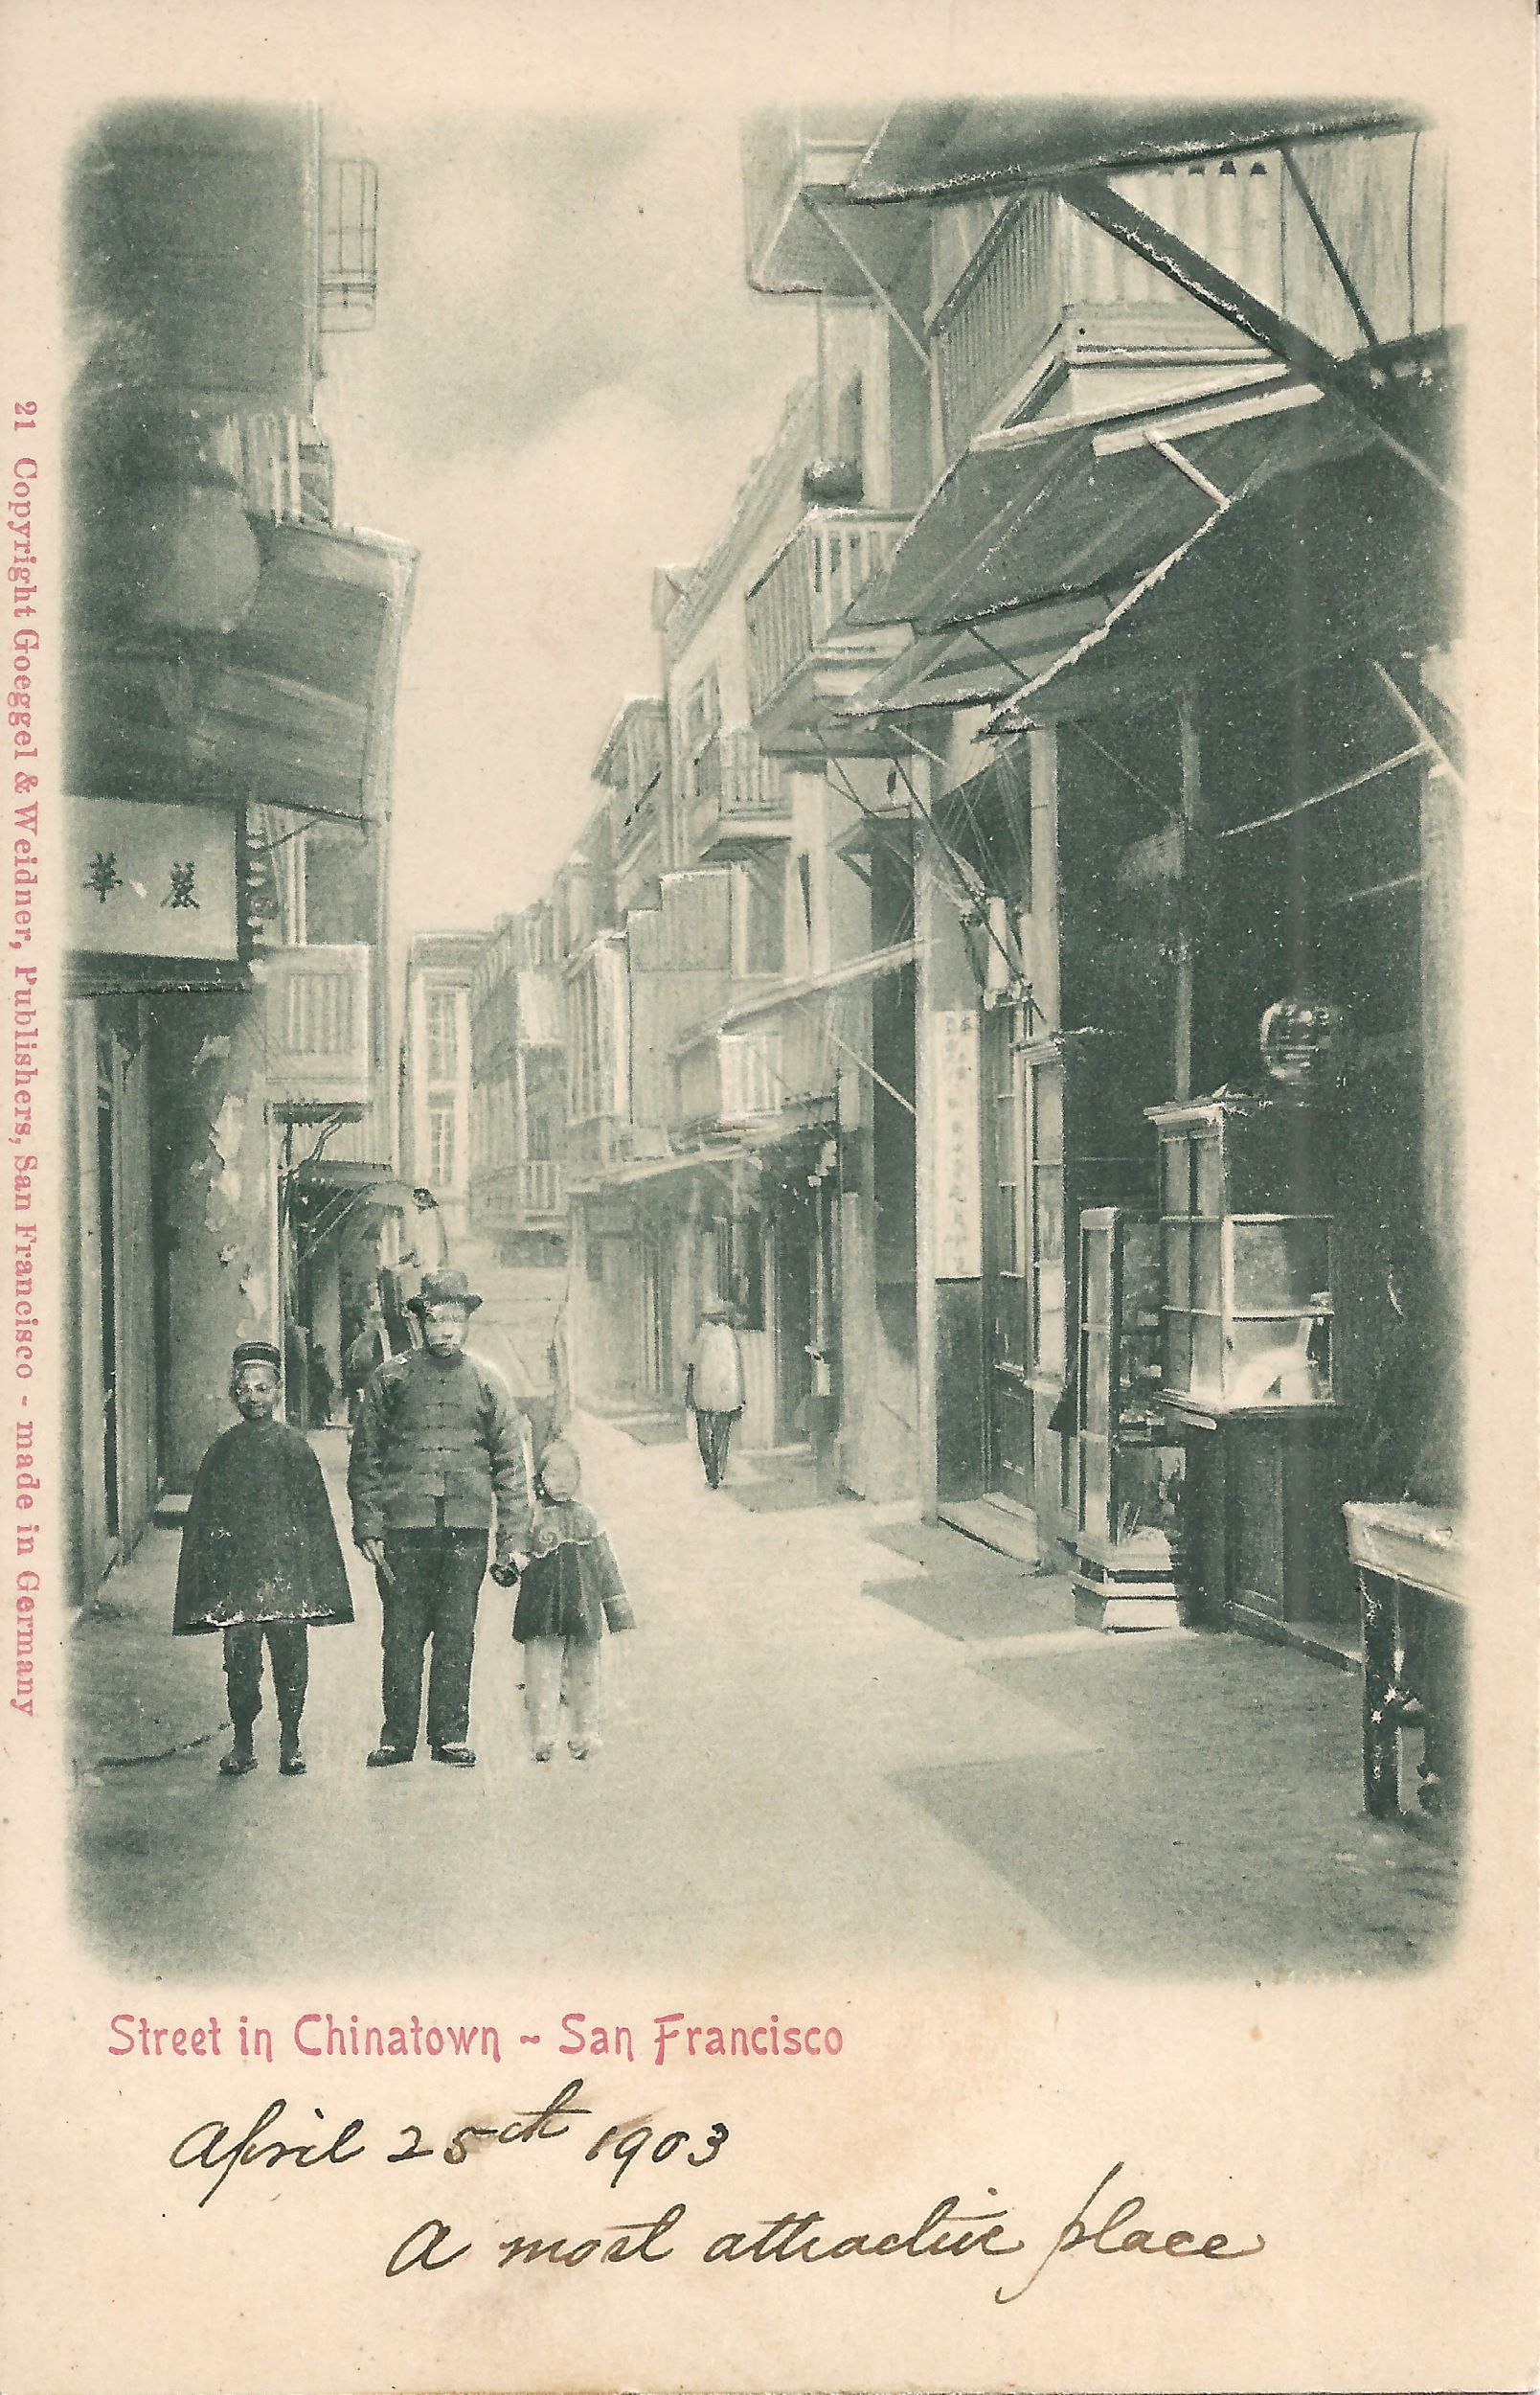 Black-and-white photo postcard of three figures walking down a narrow city street. Underneath, in red, are the words "Street in Chinatown - San Francisco," and then underneath that, in script, "April 25th 1903 / A most attractive place." Along the left side is a copyright notice, also in red.